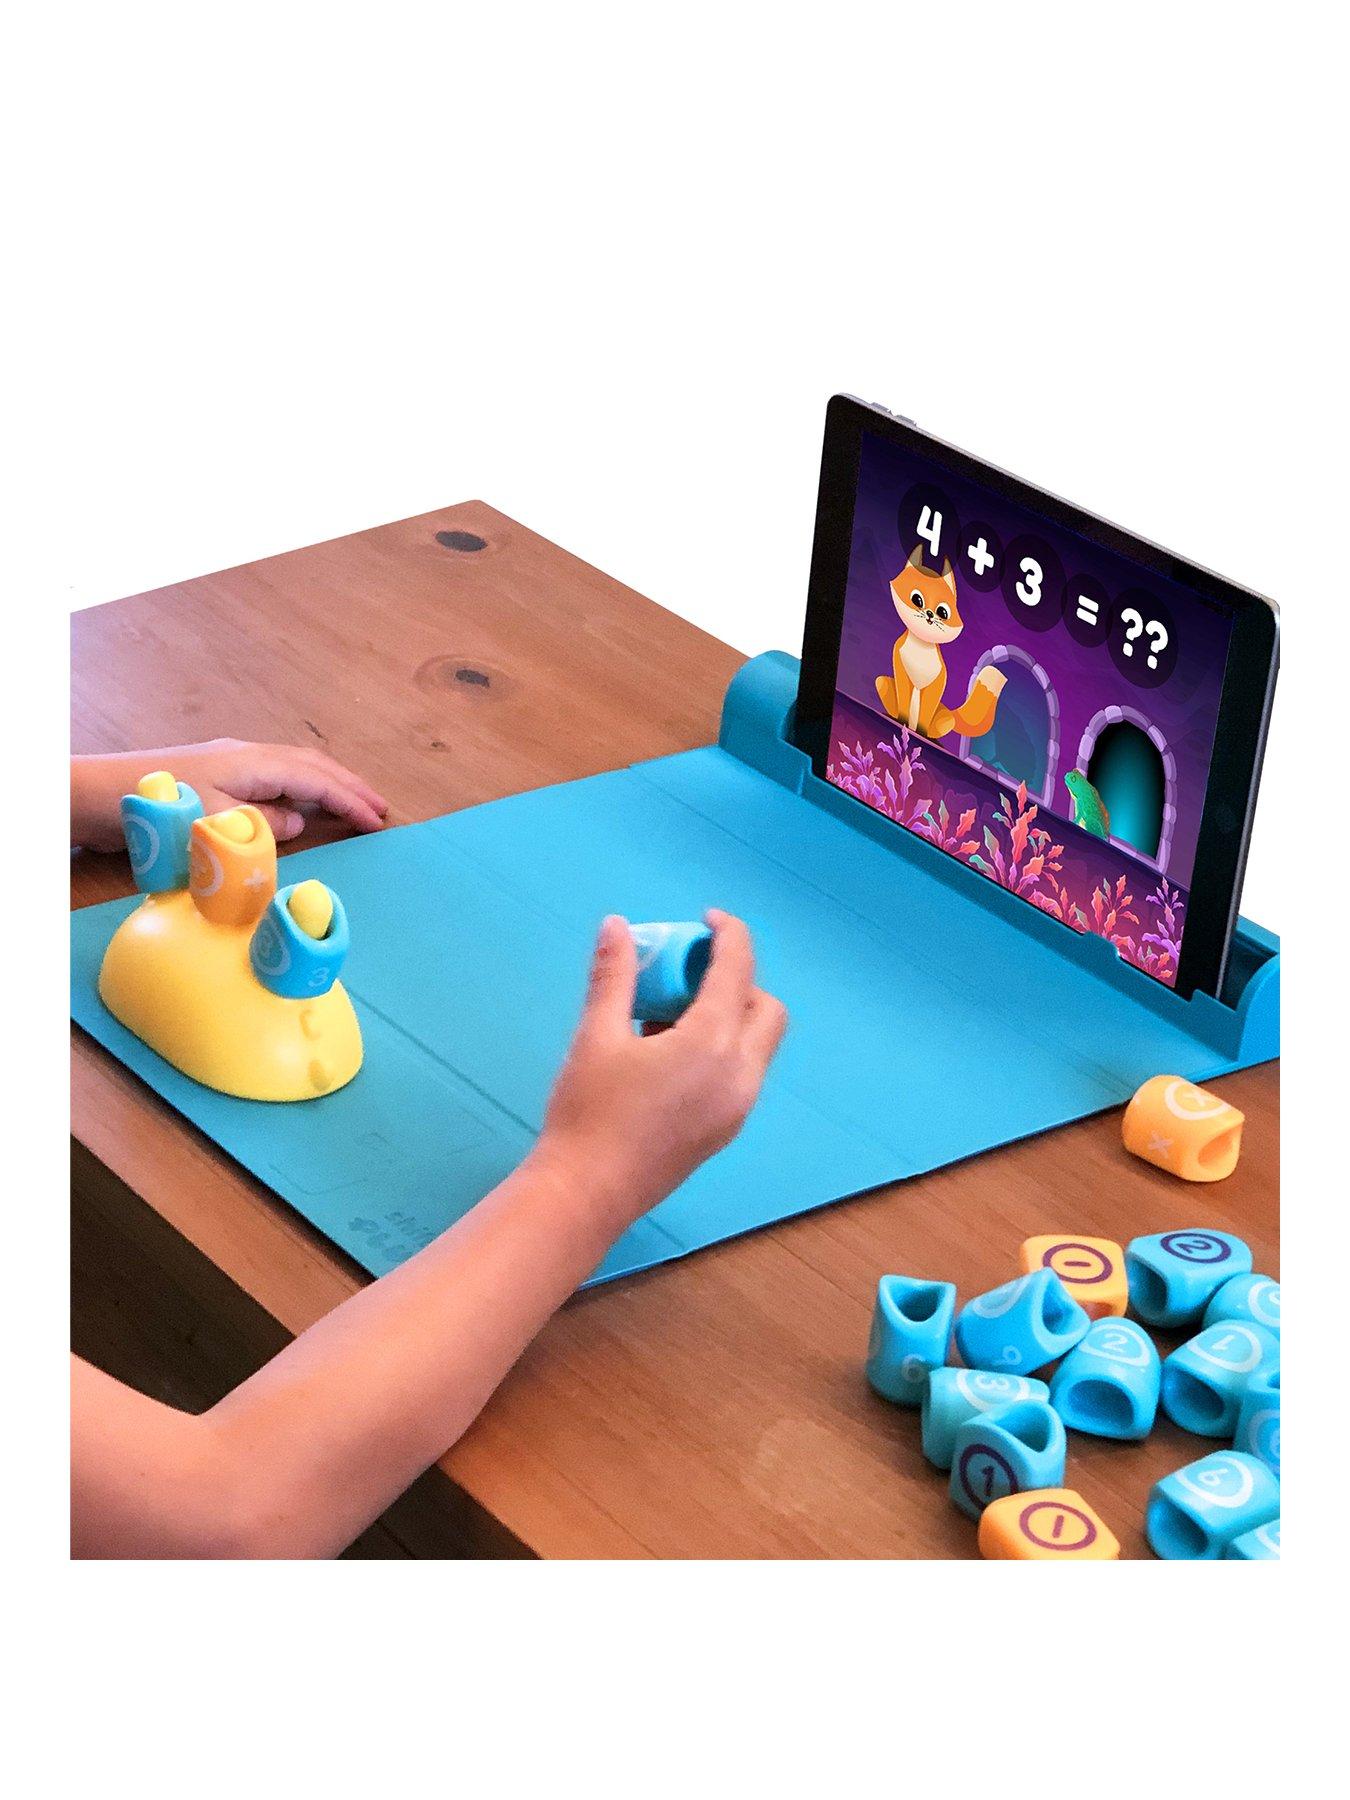 Playshifu Plugo Count By Playshifu - Math Games With Stories For 4-10 Years - Stem Toy With Addition, Subtraction, Multiplication, Division